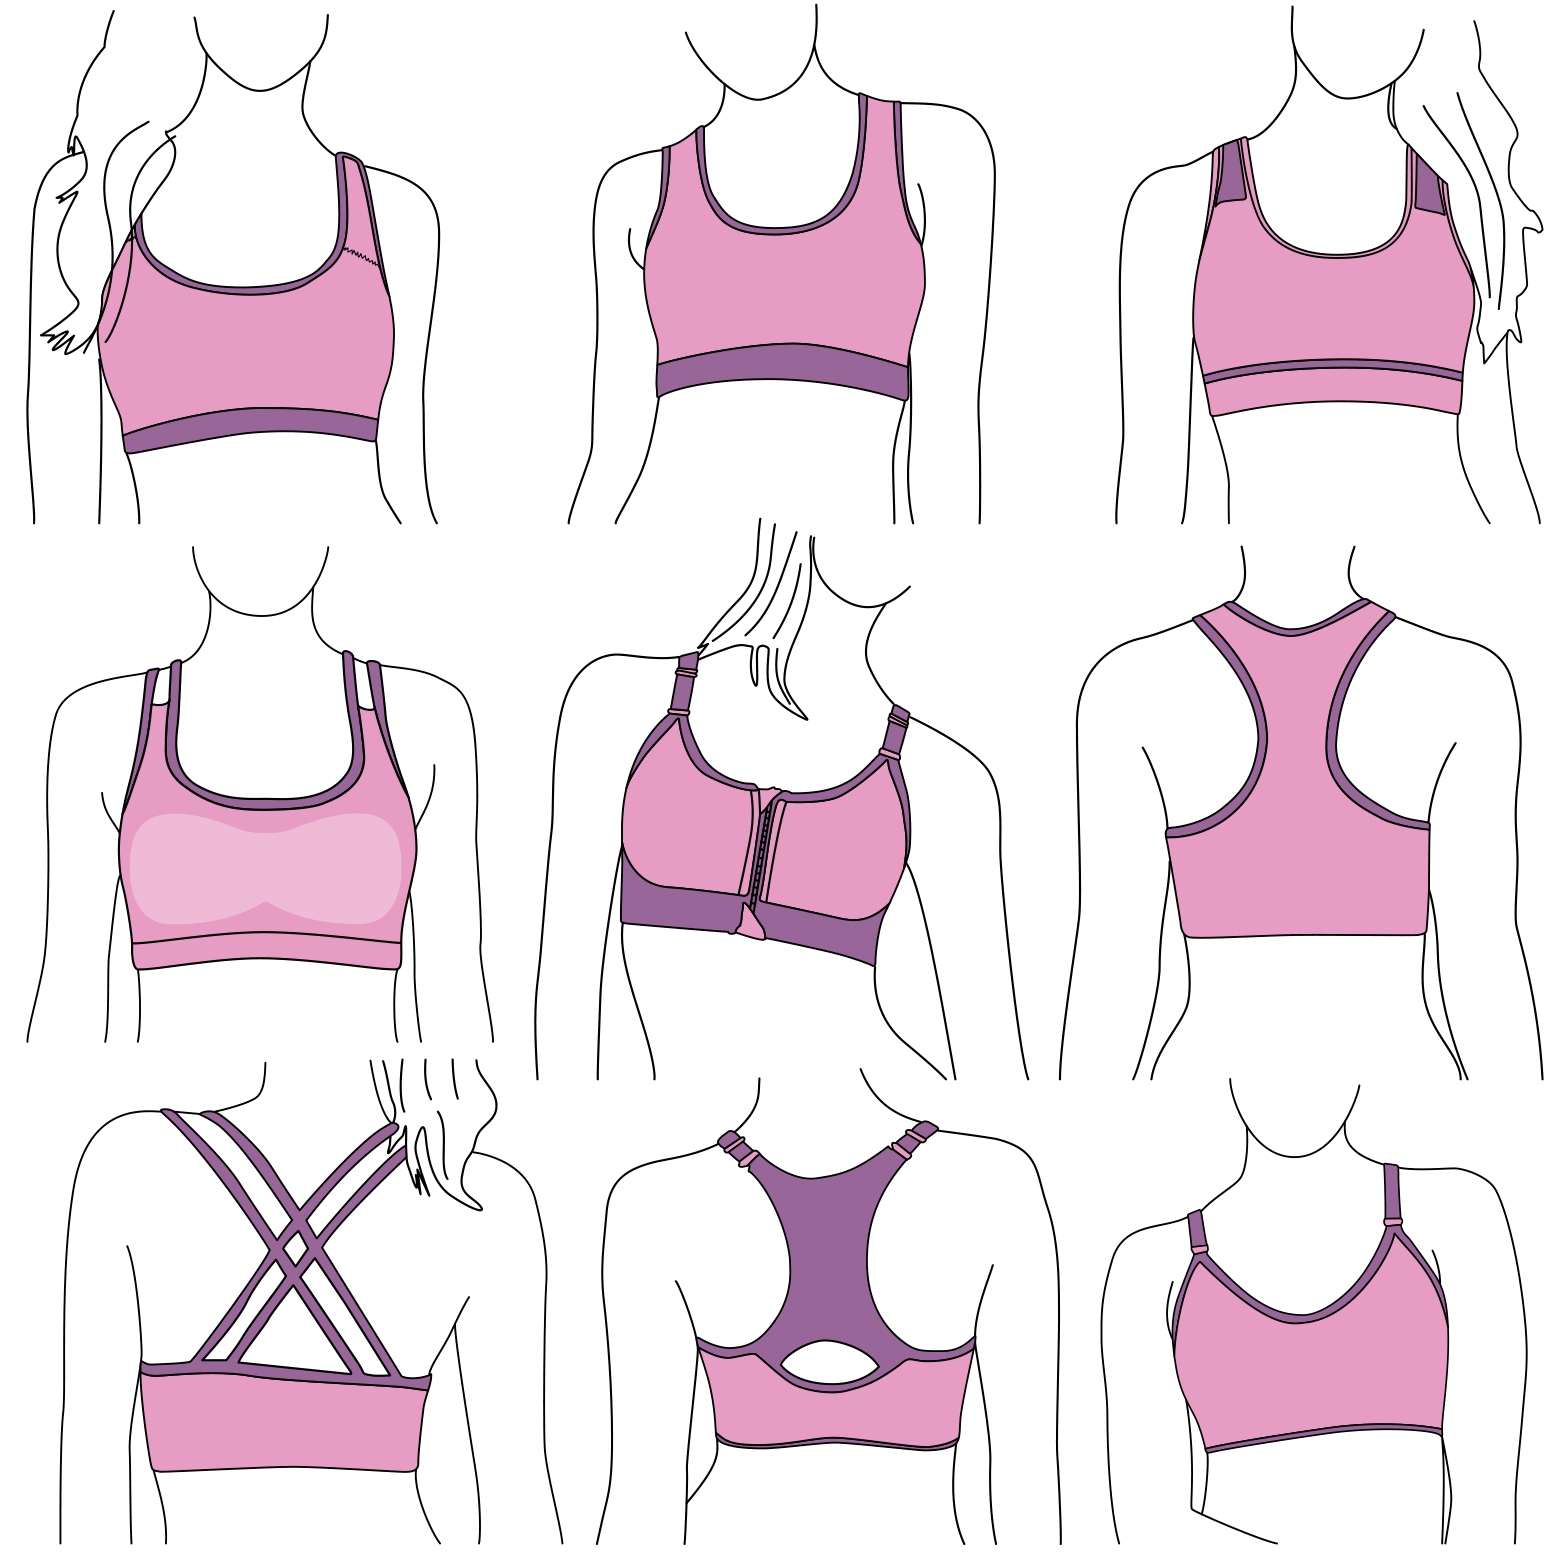 Sports Bra Guide for Size, Choose, Fit, Fabric & Types - Must Know